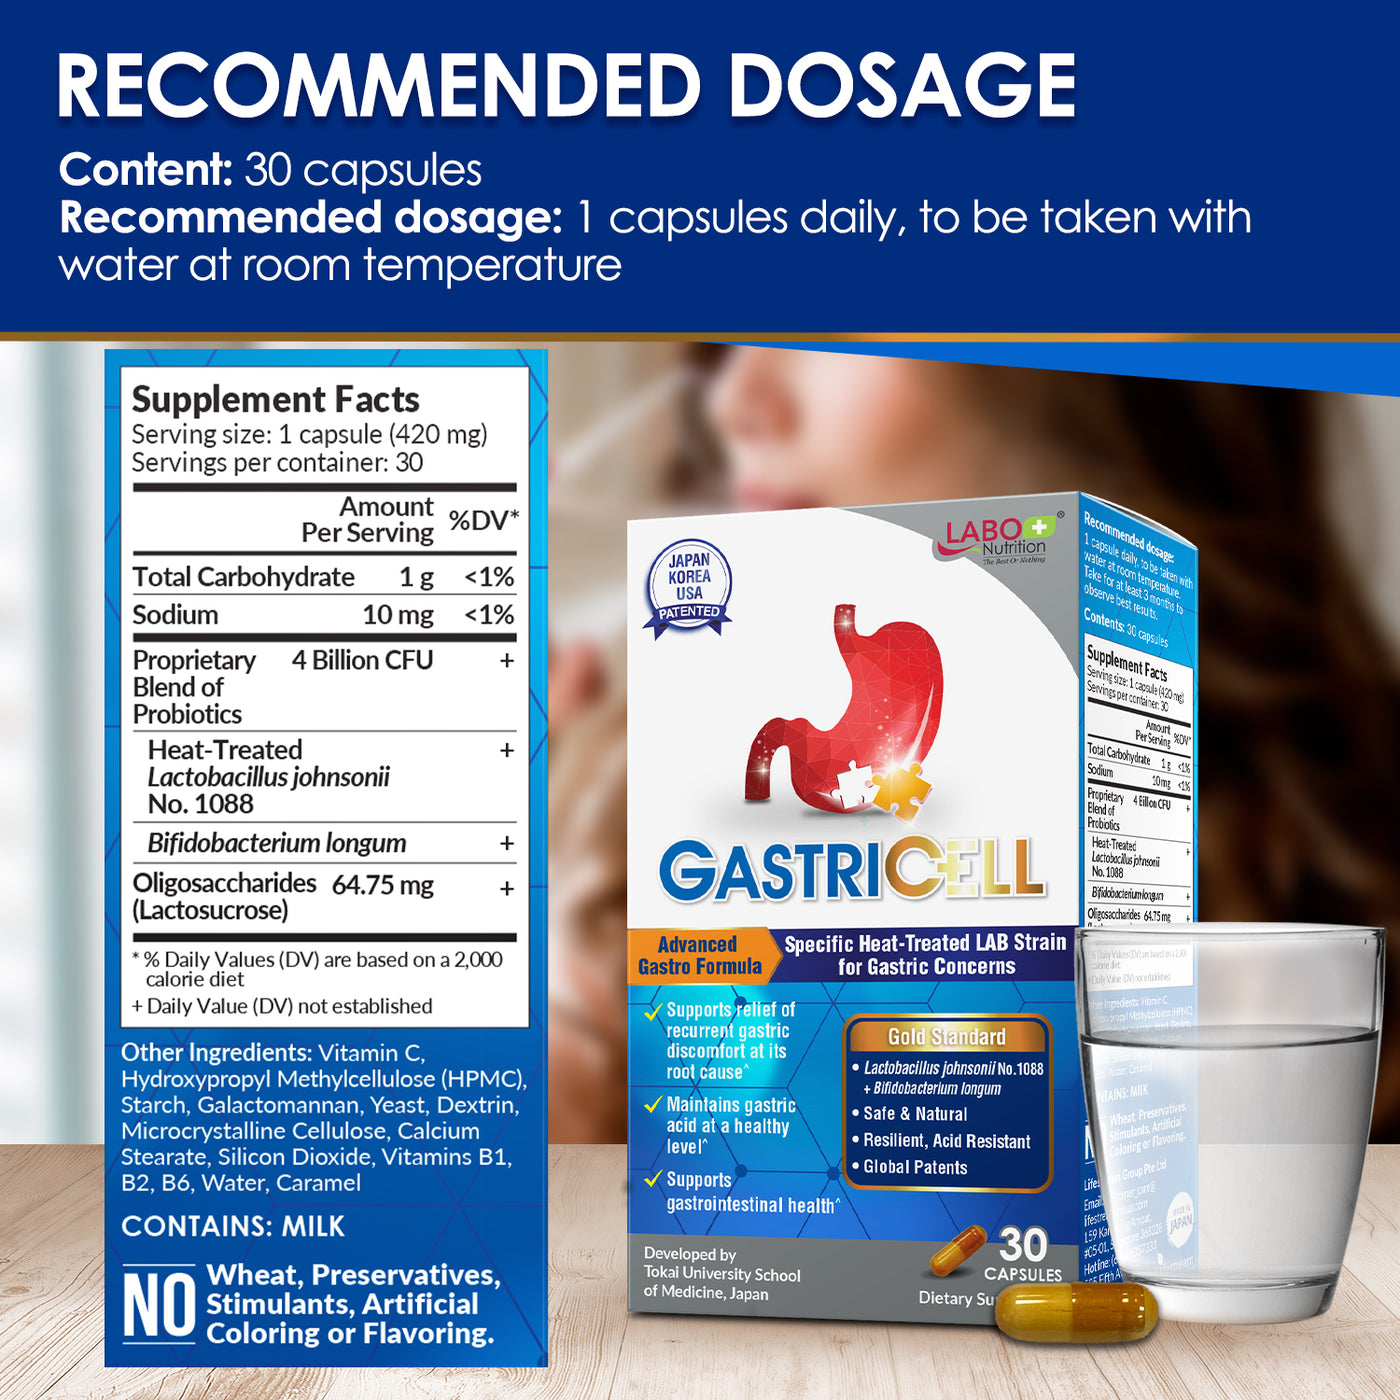 LABO Nutrition GASTRICELL - Eliminate H. Pylori, Relieve Acid Reflux & Heartburn, Regulate Gastric Acid, Natural Treatment, Target The Root Cause of Recurring Gastric Problems, Probiotic, 30 Capsules - Lifestream Group US